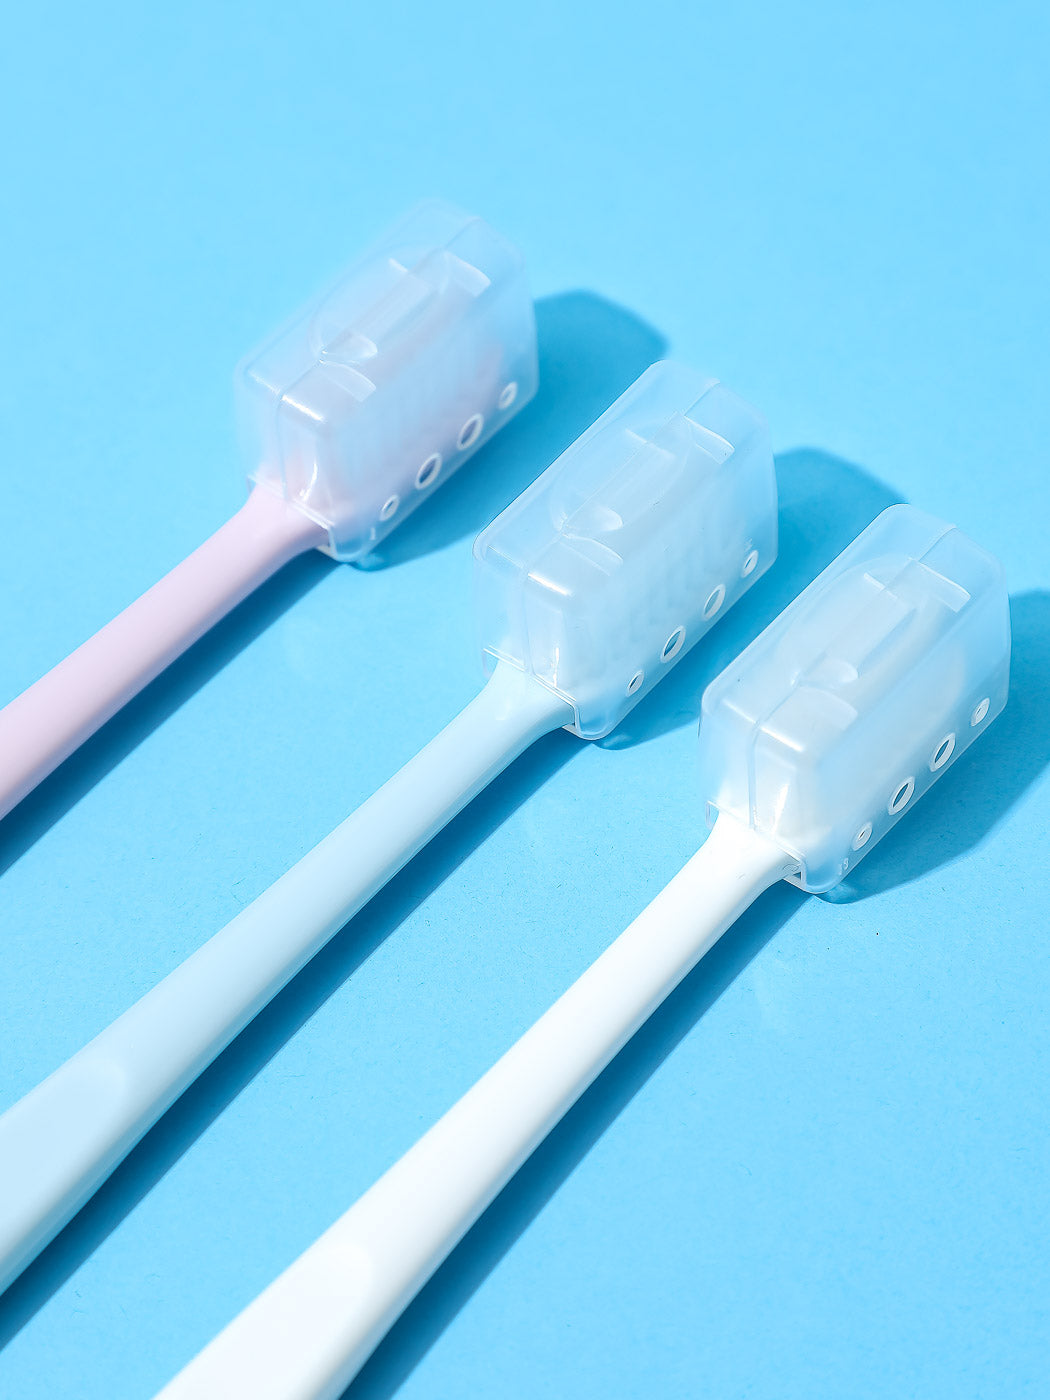 MINISO SIMPLE STYLE GUM PROTECTION TOOTHBRUSH ( 8 PACK ) 2006868910107 TOOTHBRUSH